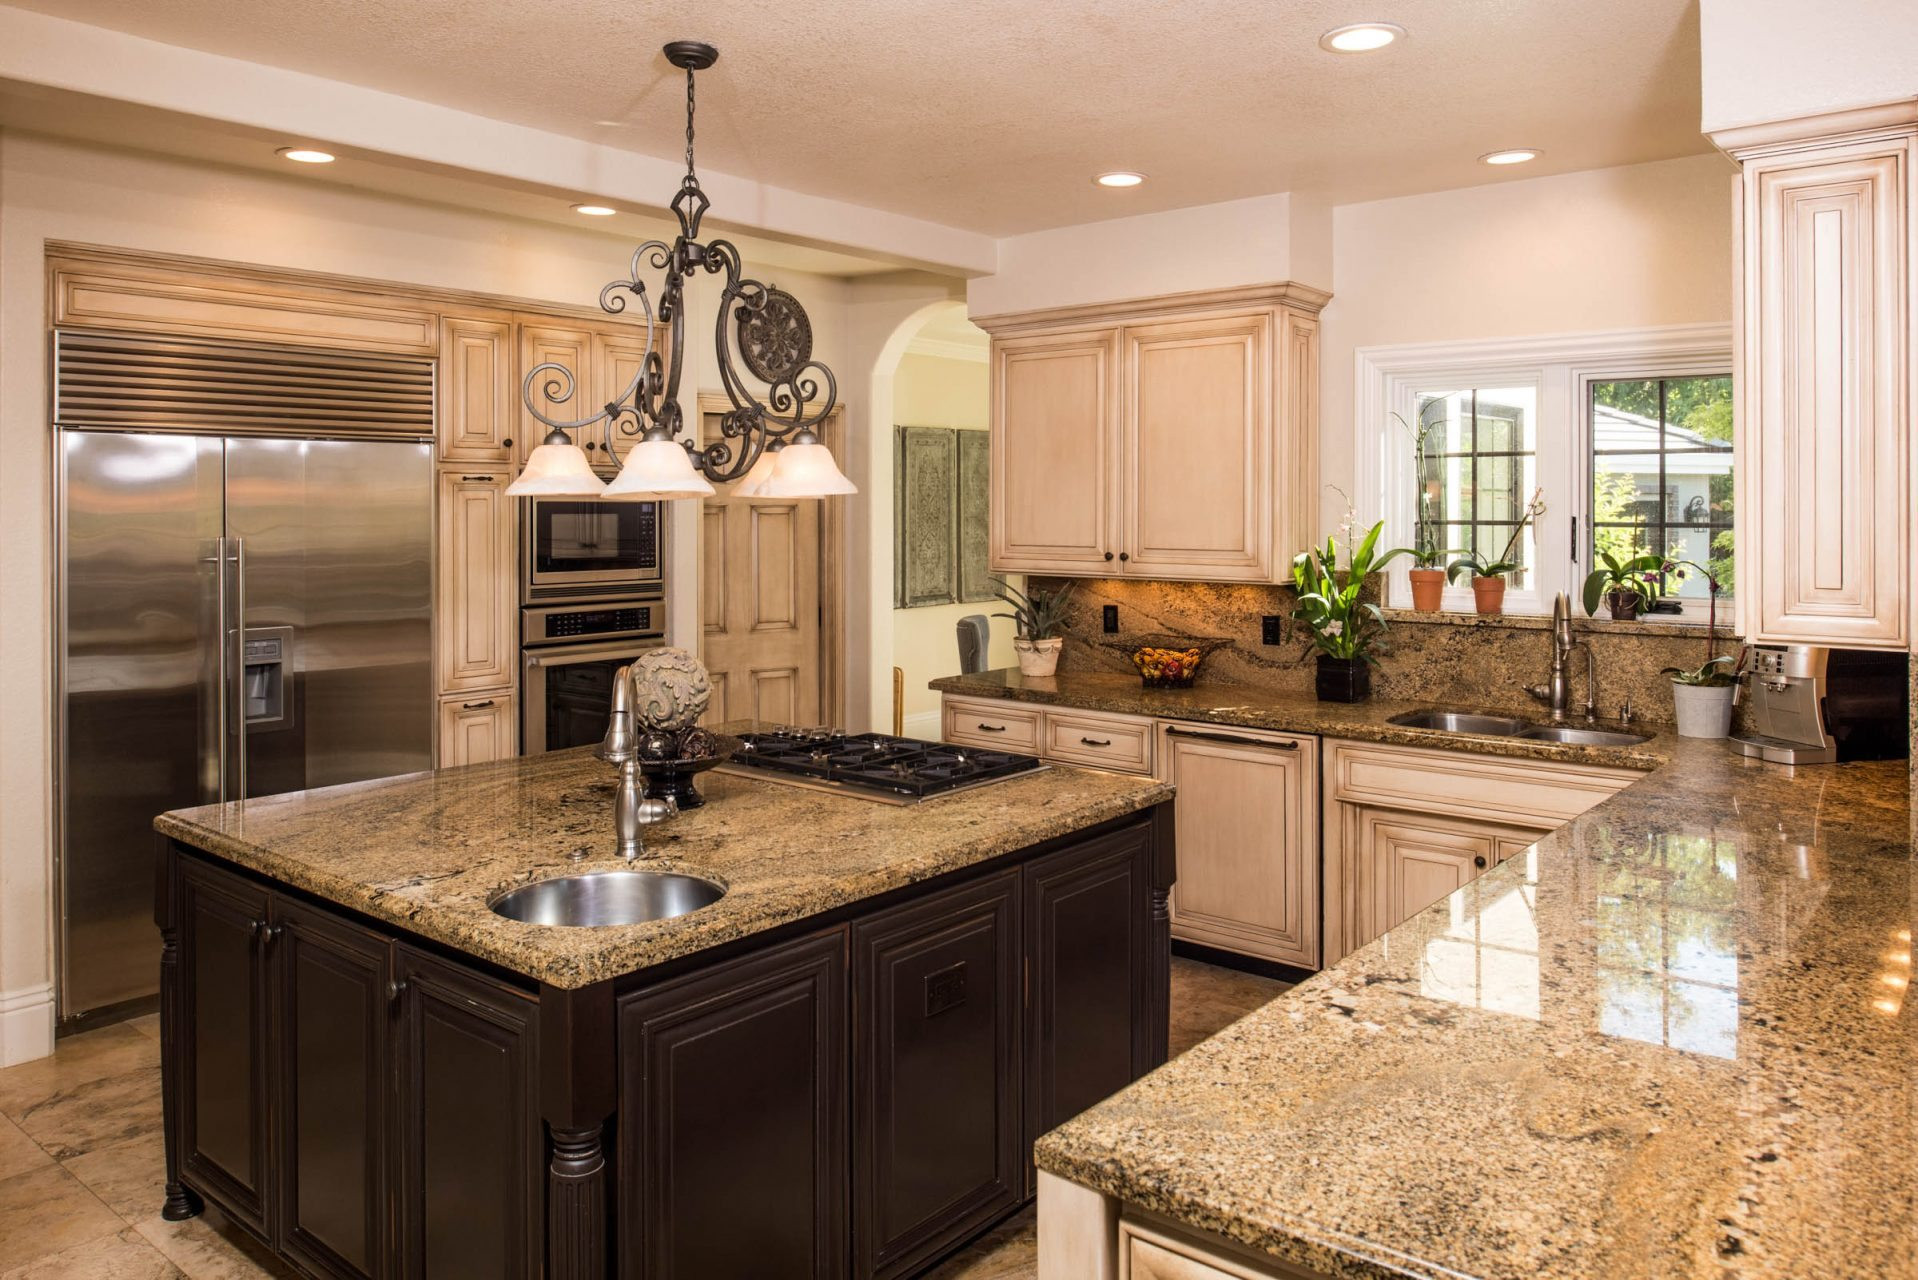 Kitchen Remodel Photos
 Expert Home Remodelers Building Pros